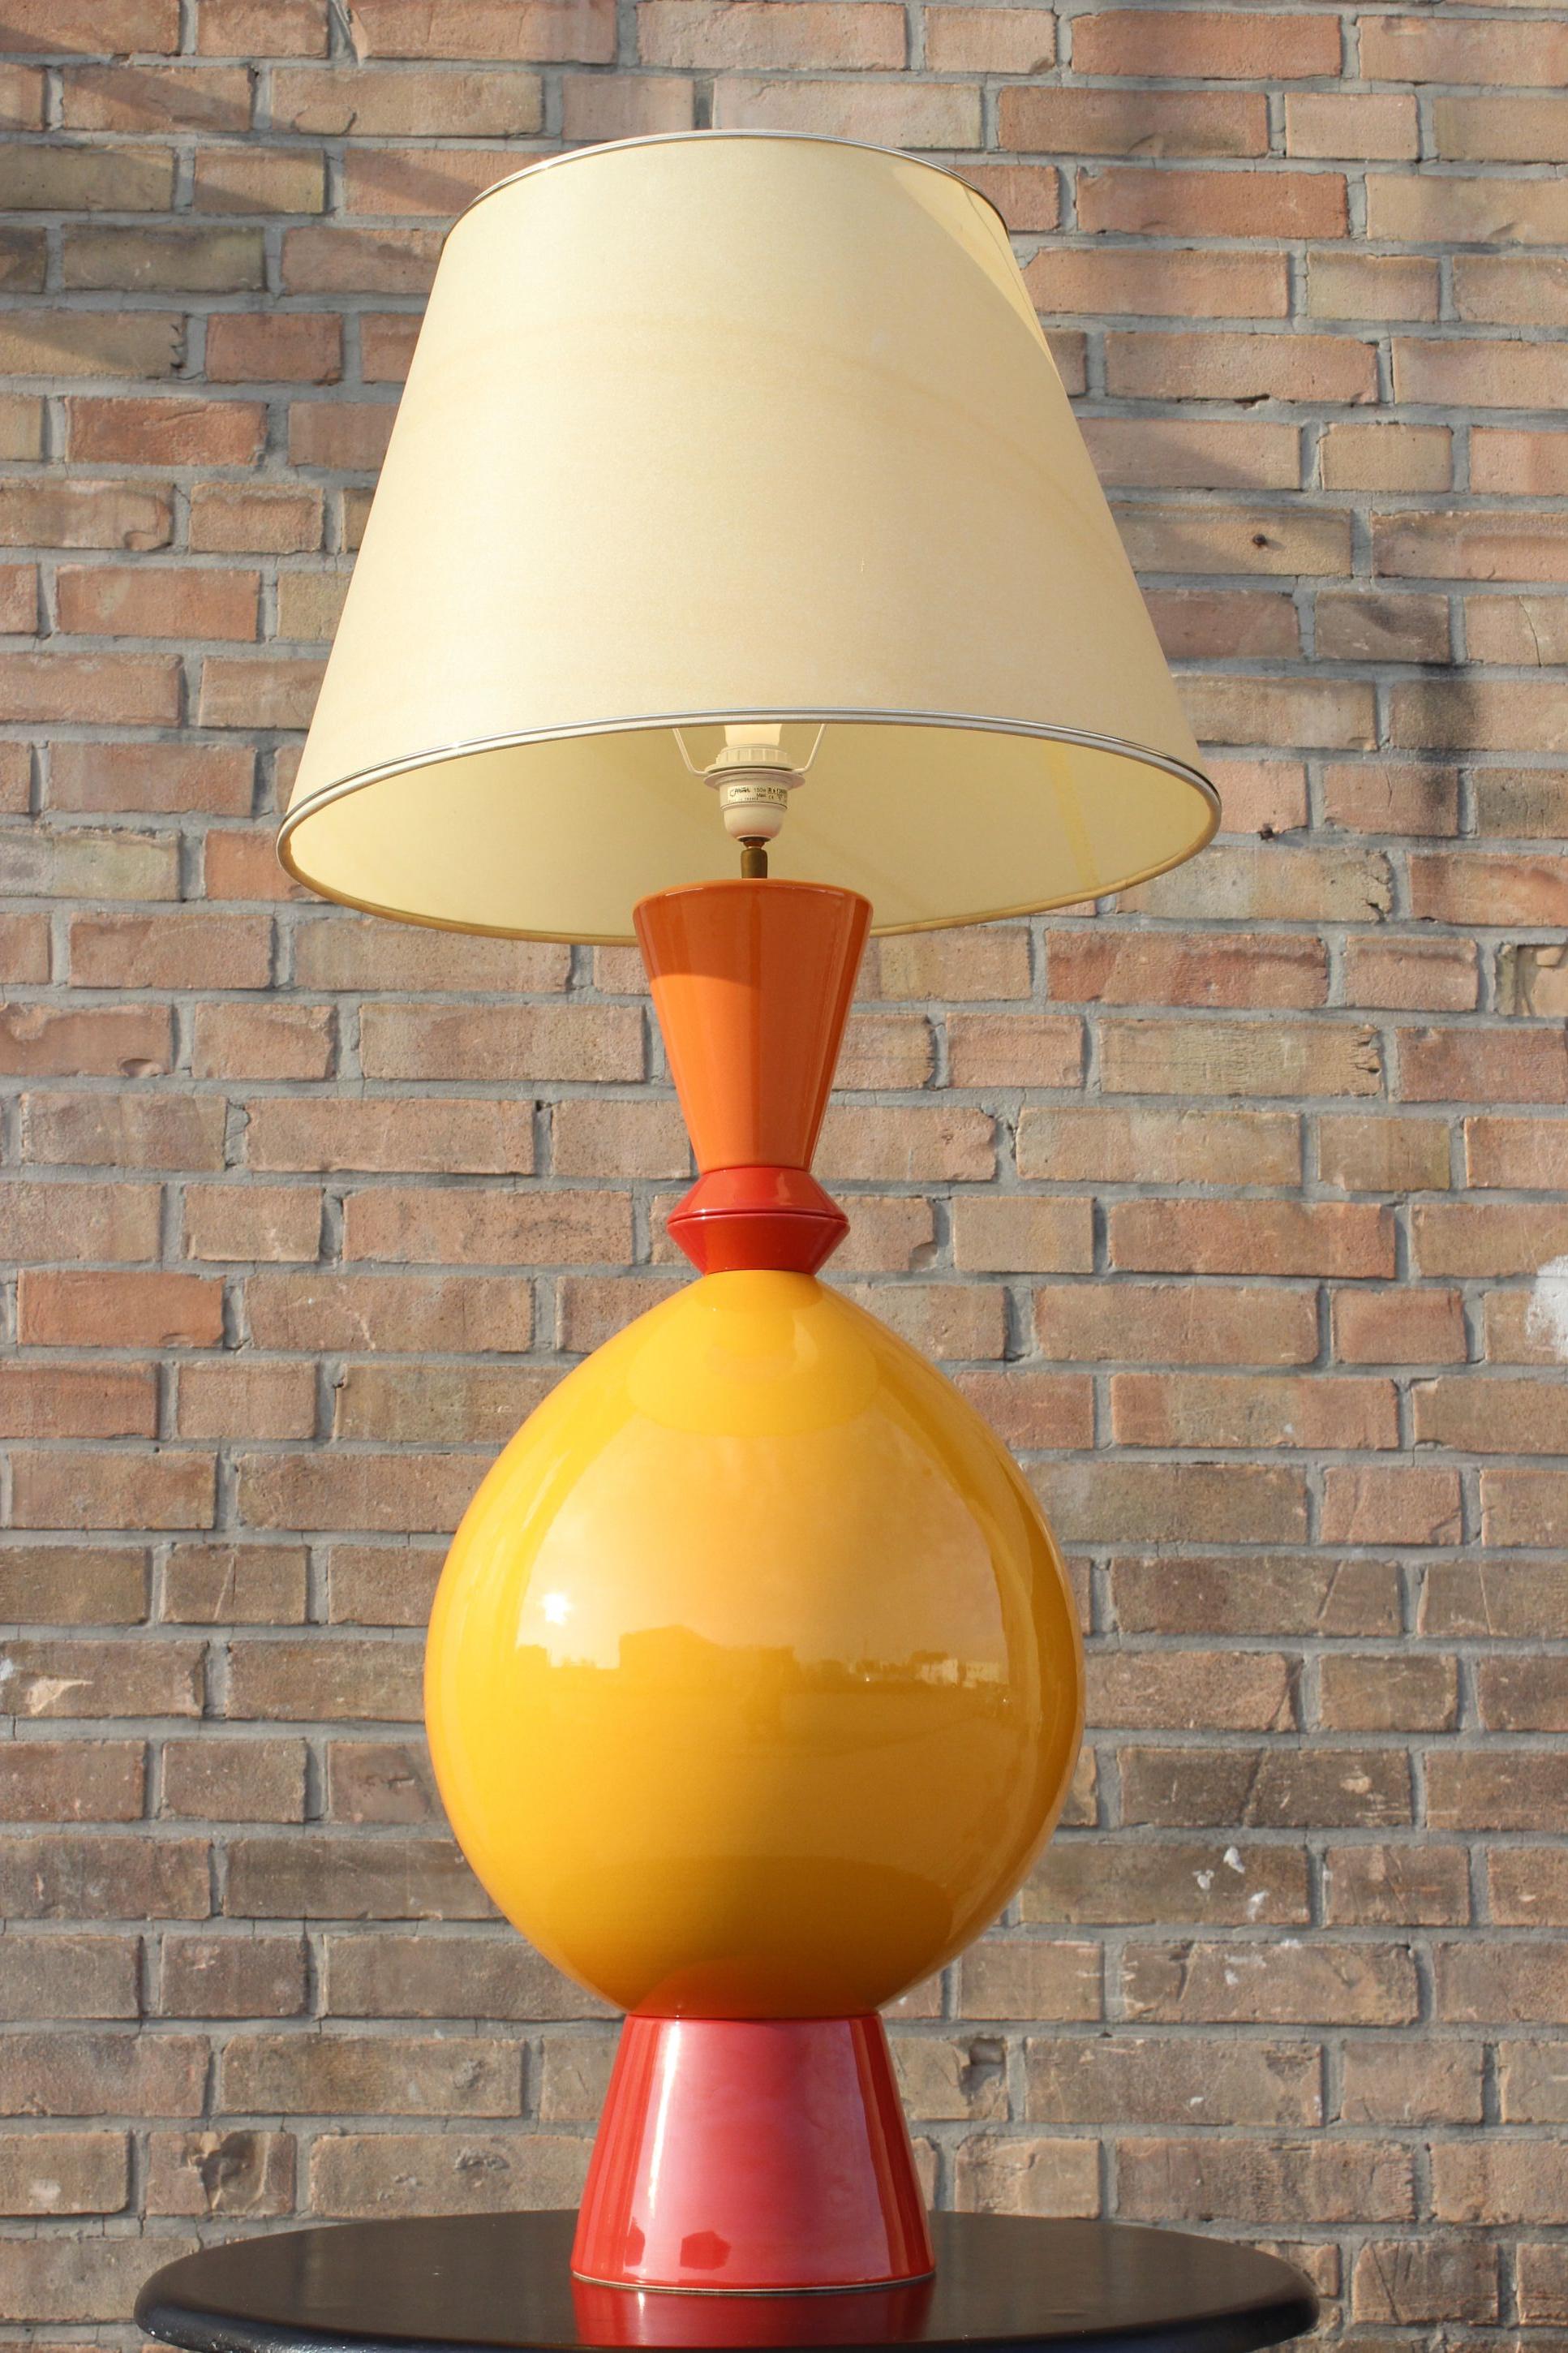 Large ceramic lamp by Lampes D'Albret, which was a sister company of Drimmer, which were renowned for their post-modernist productions mostly in glazed ceramic, the lamp was produced in the early 1990s. 

The large body resembles a totem, inspired